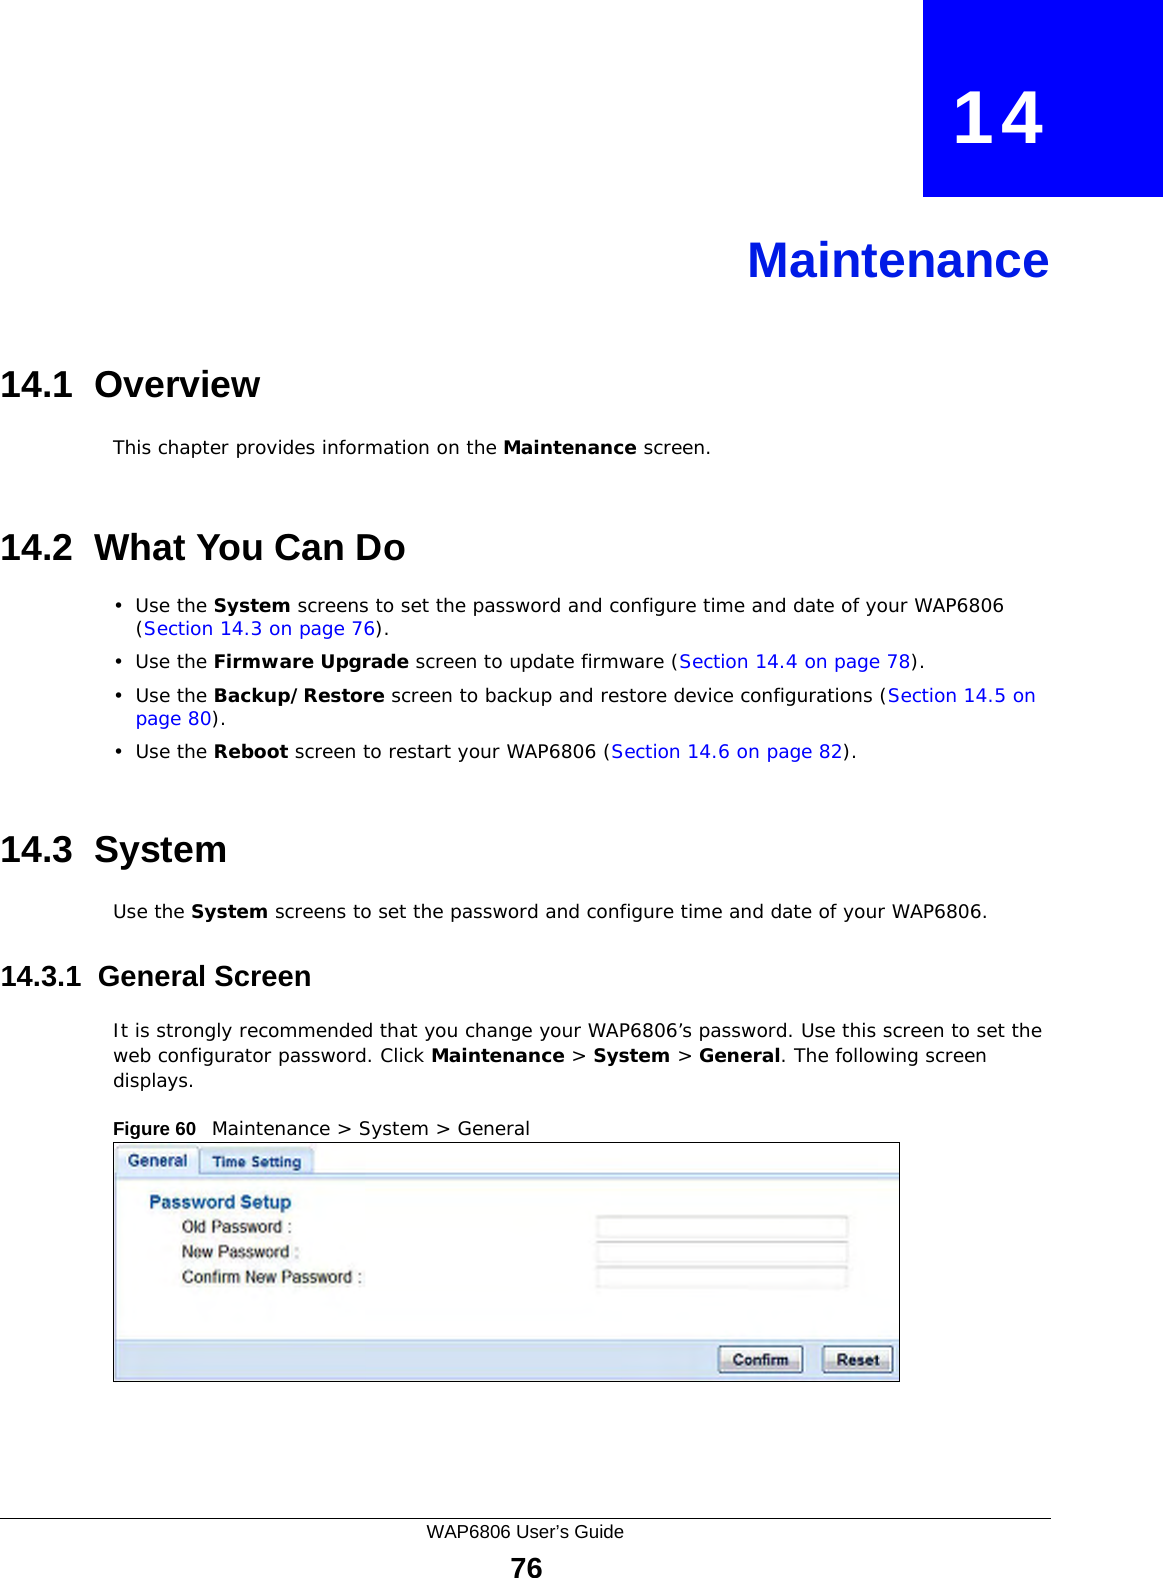 WAP6806 User’s Guide76CHAPTER   14Maintenance14.1  OverviewThis chapter provides information on the Maintenance screen. 14.2  What You Can Do•Use the System screens to set the password and configure time and date of your WAP6806 (Section 14.3 on page 76).•Use the Firmware Upgrade screen to update firmware (Section 14.4 on page 78).•Use the Backup/Restore screen to backup and restore device configurations (Section 14.5 on page 80).•Use the Reboot screen to restart your WAP6806 (Section 14.6 on page 82).14.3  SystemUse the System screens to set the password and configure time and date of your WAP6806. 14.3.1  General ScreenIt is strongly recommended that you change your WAP6806’s password. Use this screen to set the web configurator password. Click Maintenance &gt; System &gt; General. The following screen displays.Figure 60   Maintenance &gt; System &gt; General 